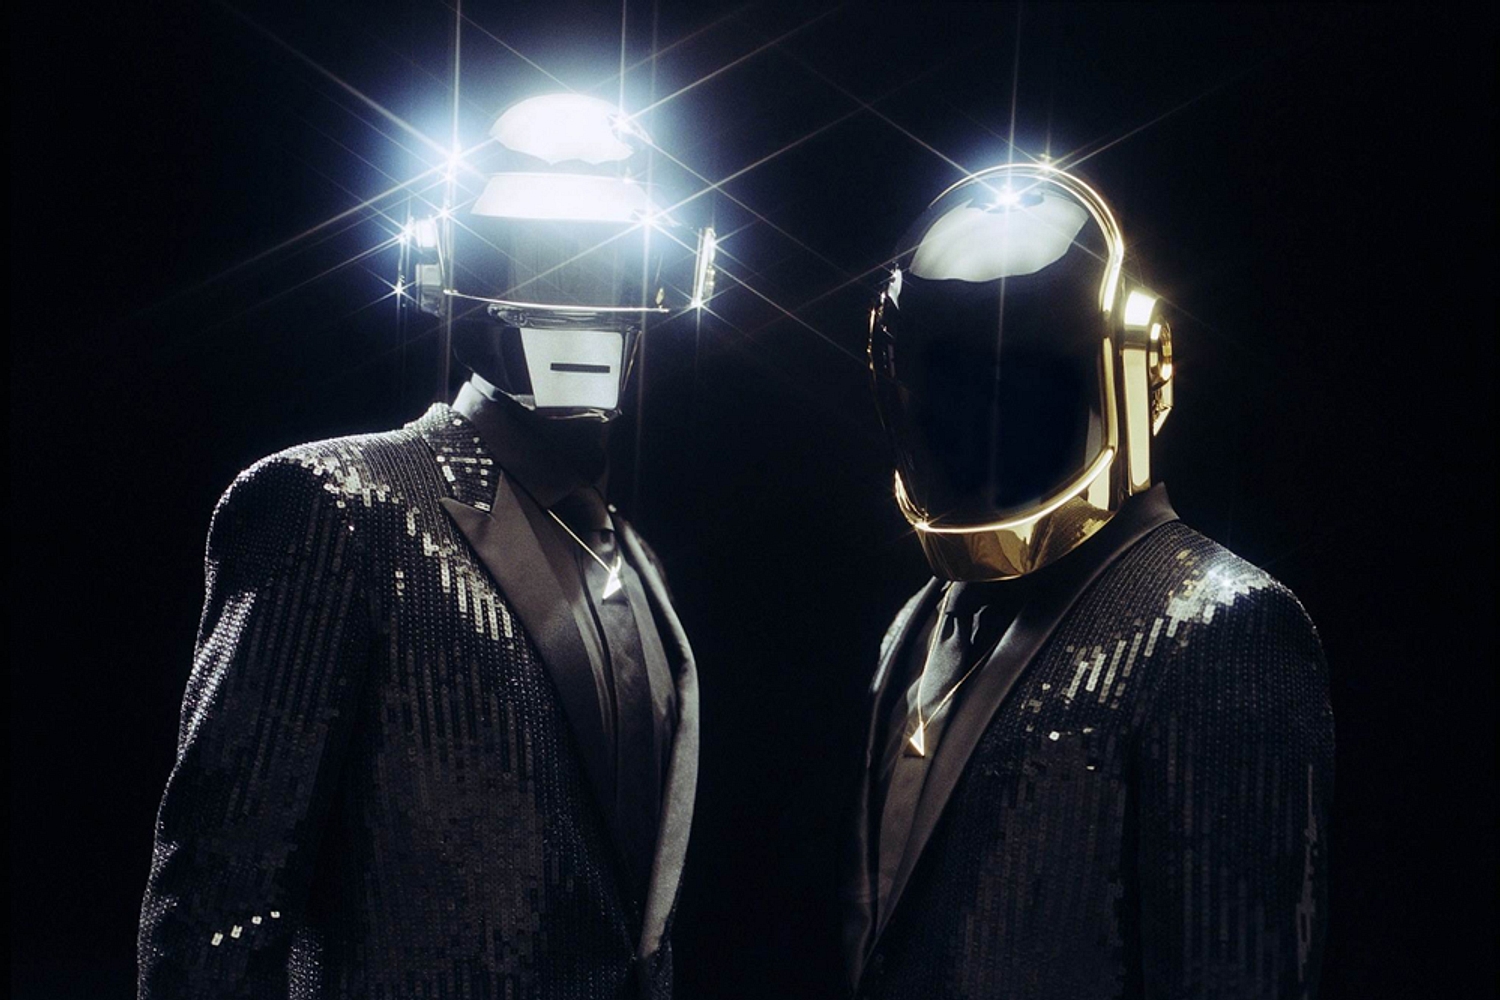 Watch Daft Punk making their live return at Grammys 2017 with The Weeknd